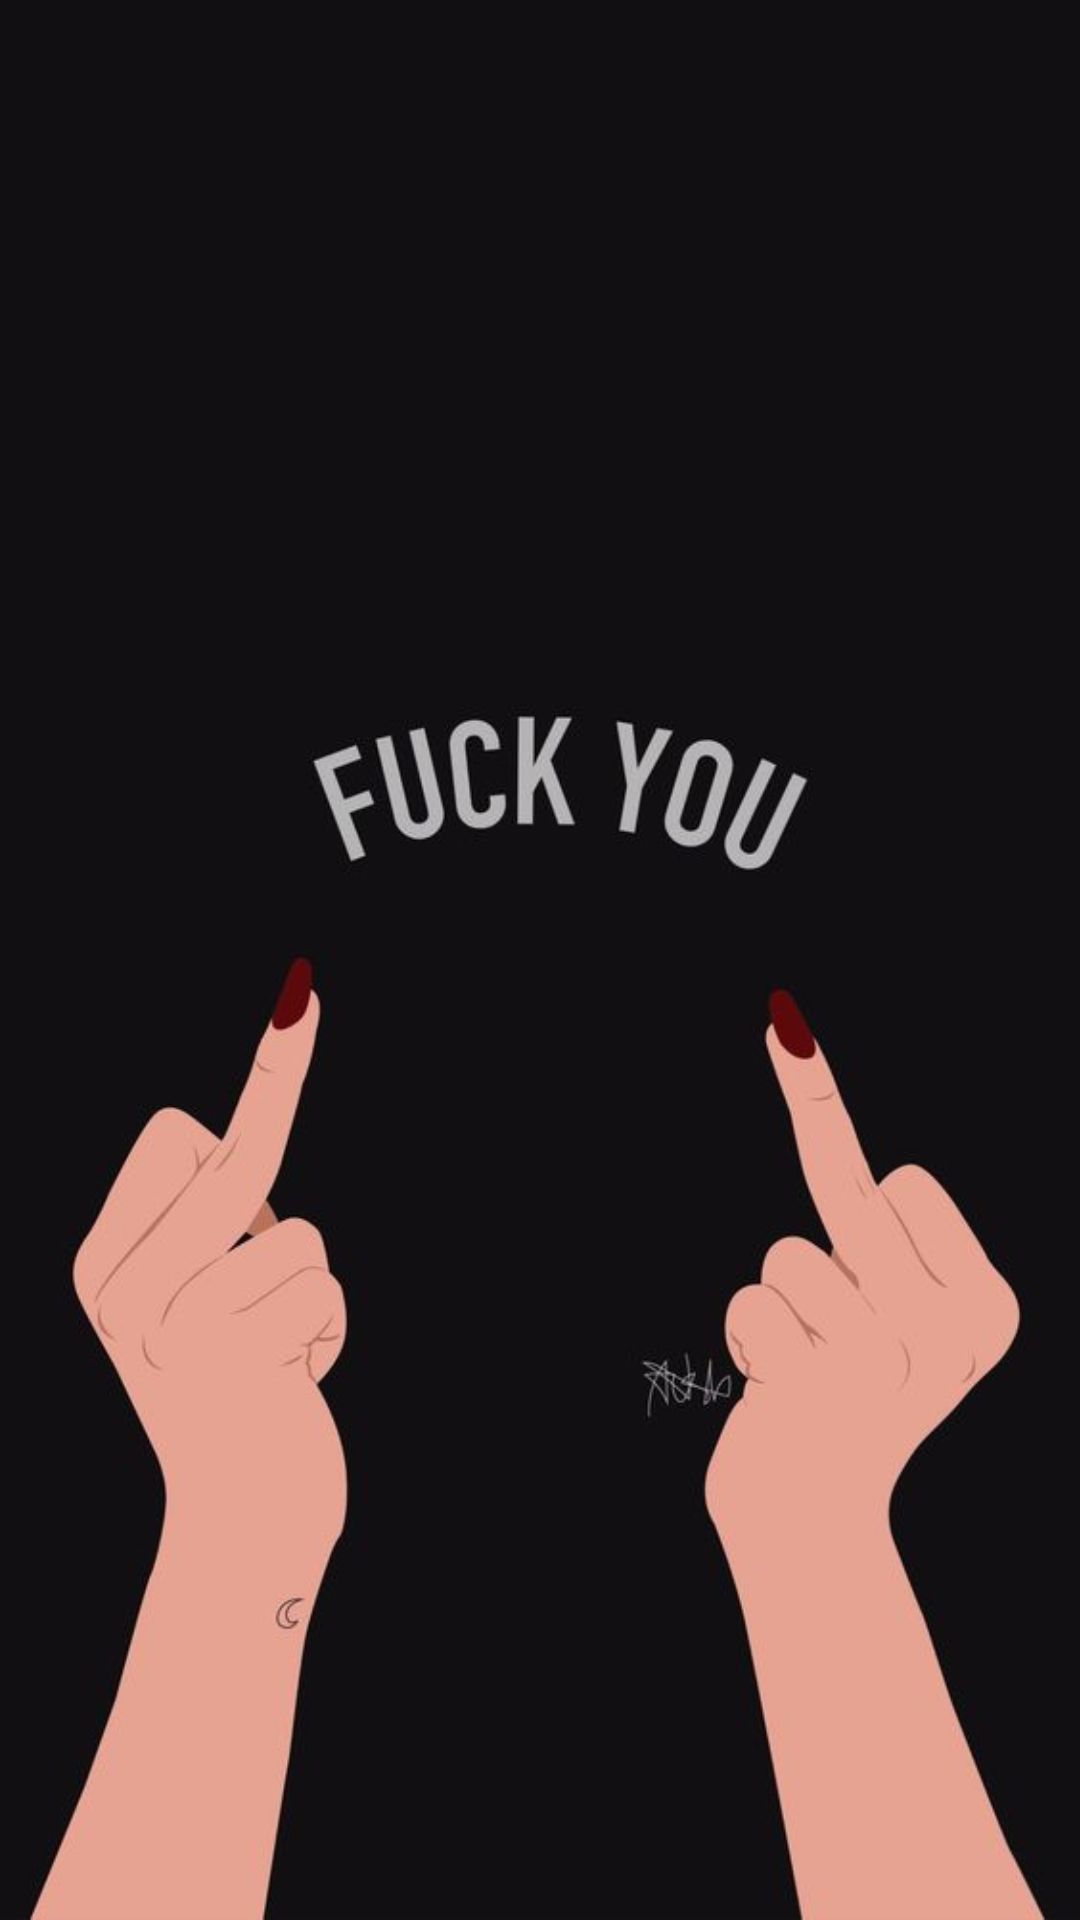 Fuck You Wallpapers - Top 35 Best Fuck You Wallpapers Download